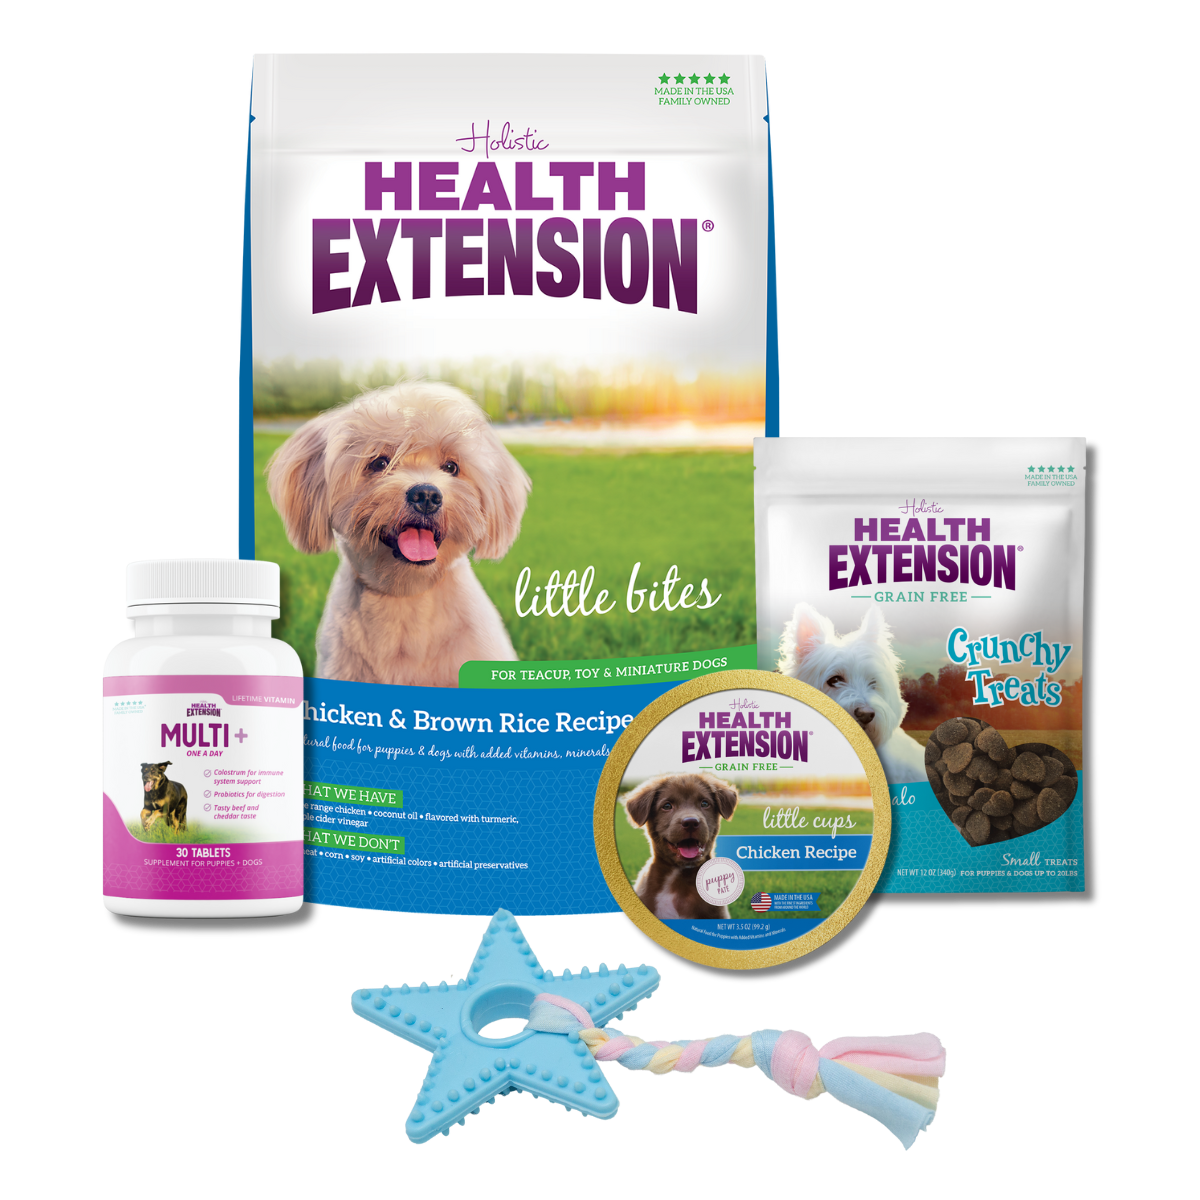 Complete Puppy Bundle: Bag of Health Extension Little Bites Chicken & Brown Rice Recipe and variety of other dog products, including food, treats, toys, and supplements.